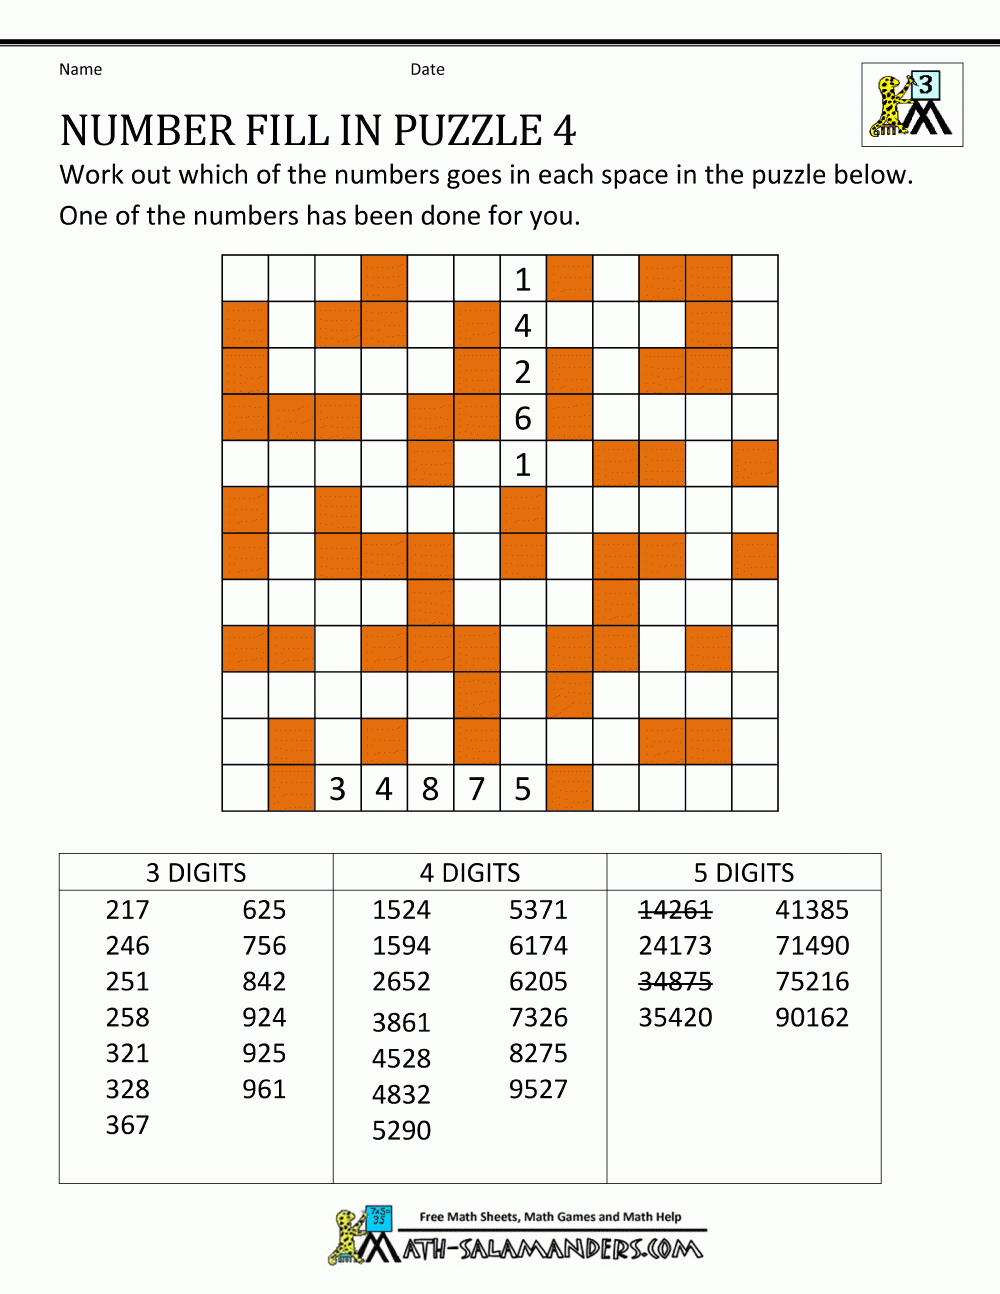 Number Fill In Puzzles - Free Printable Crossword Puzzle #6